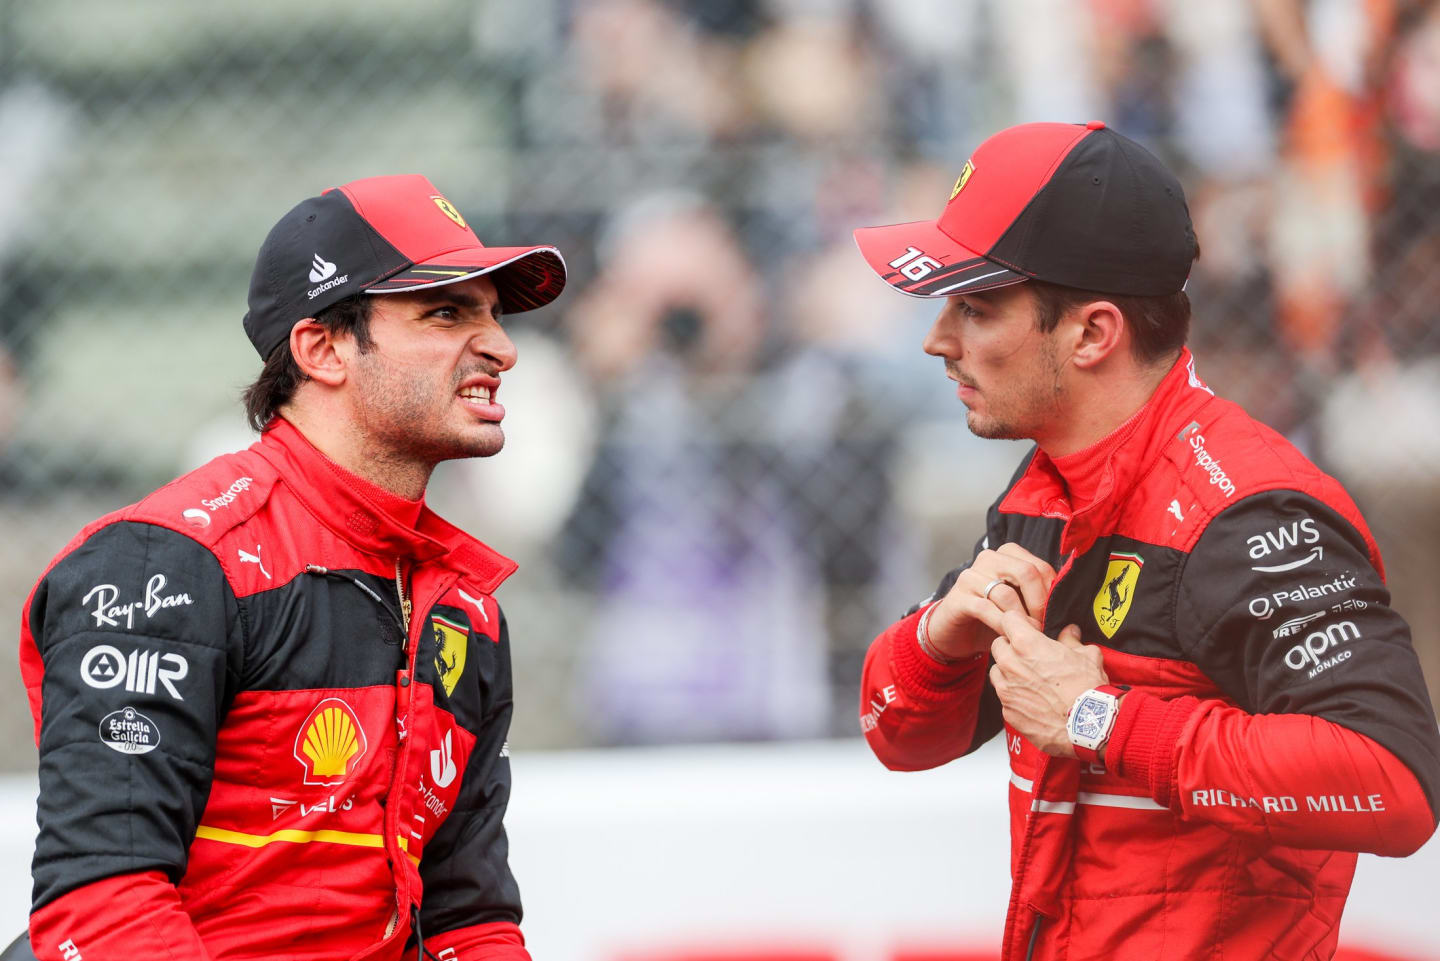 SUZUKA, JAPAN - OCTOBER 08: Carlos Sainz of Ferrari and Spain chats with Charles Leclerc of Ferrari and Monaco during qualifying ahead of the F1 Grand Prix of Japan at Suzuka International Racing Course on October 08, 2022 in Suzuka, Japan. (Photo by Peter Fox/Getty Images )